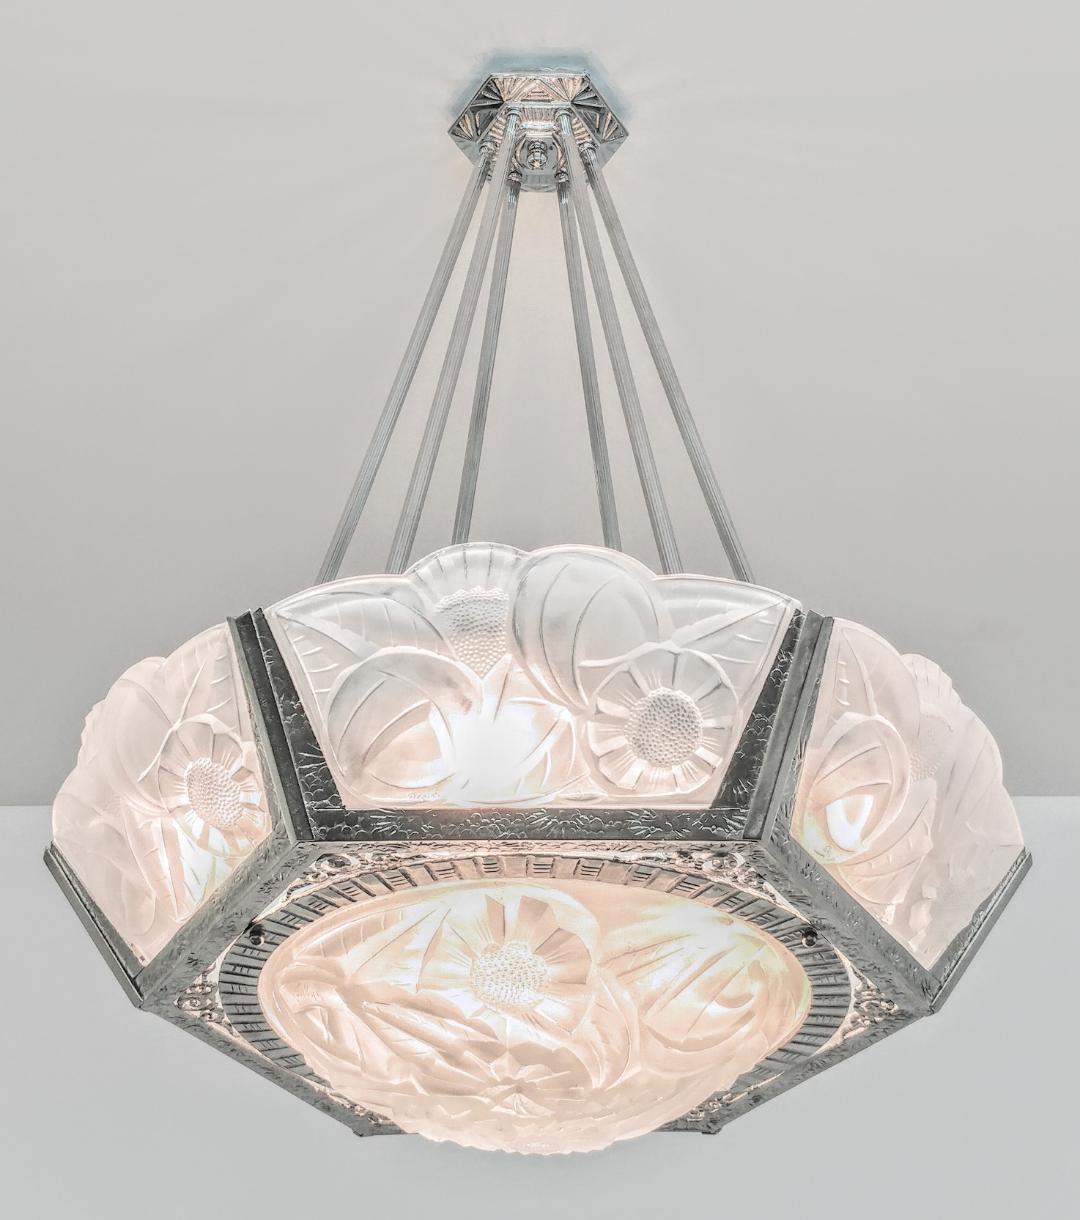 A French Art Deco chandelier with six-sided shades embracing a matching round center coupe in clear frosted molded shades. Each shade is signed by the French artist Degué. Flower motif polished details mounted on a nickeled wrought iron streamlined